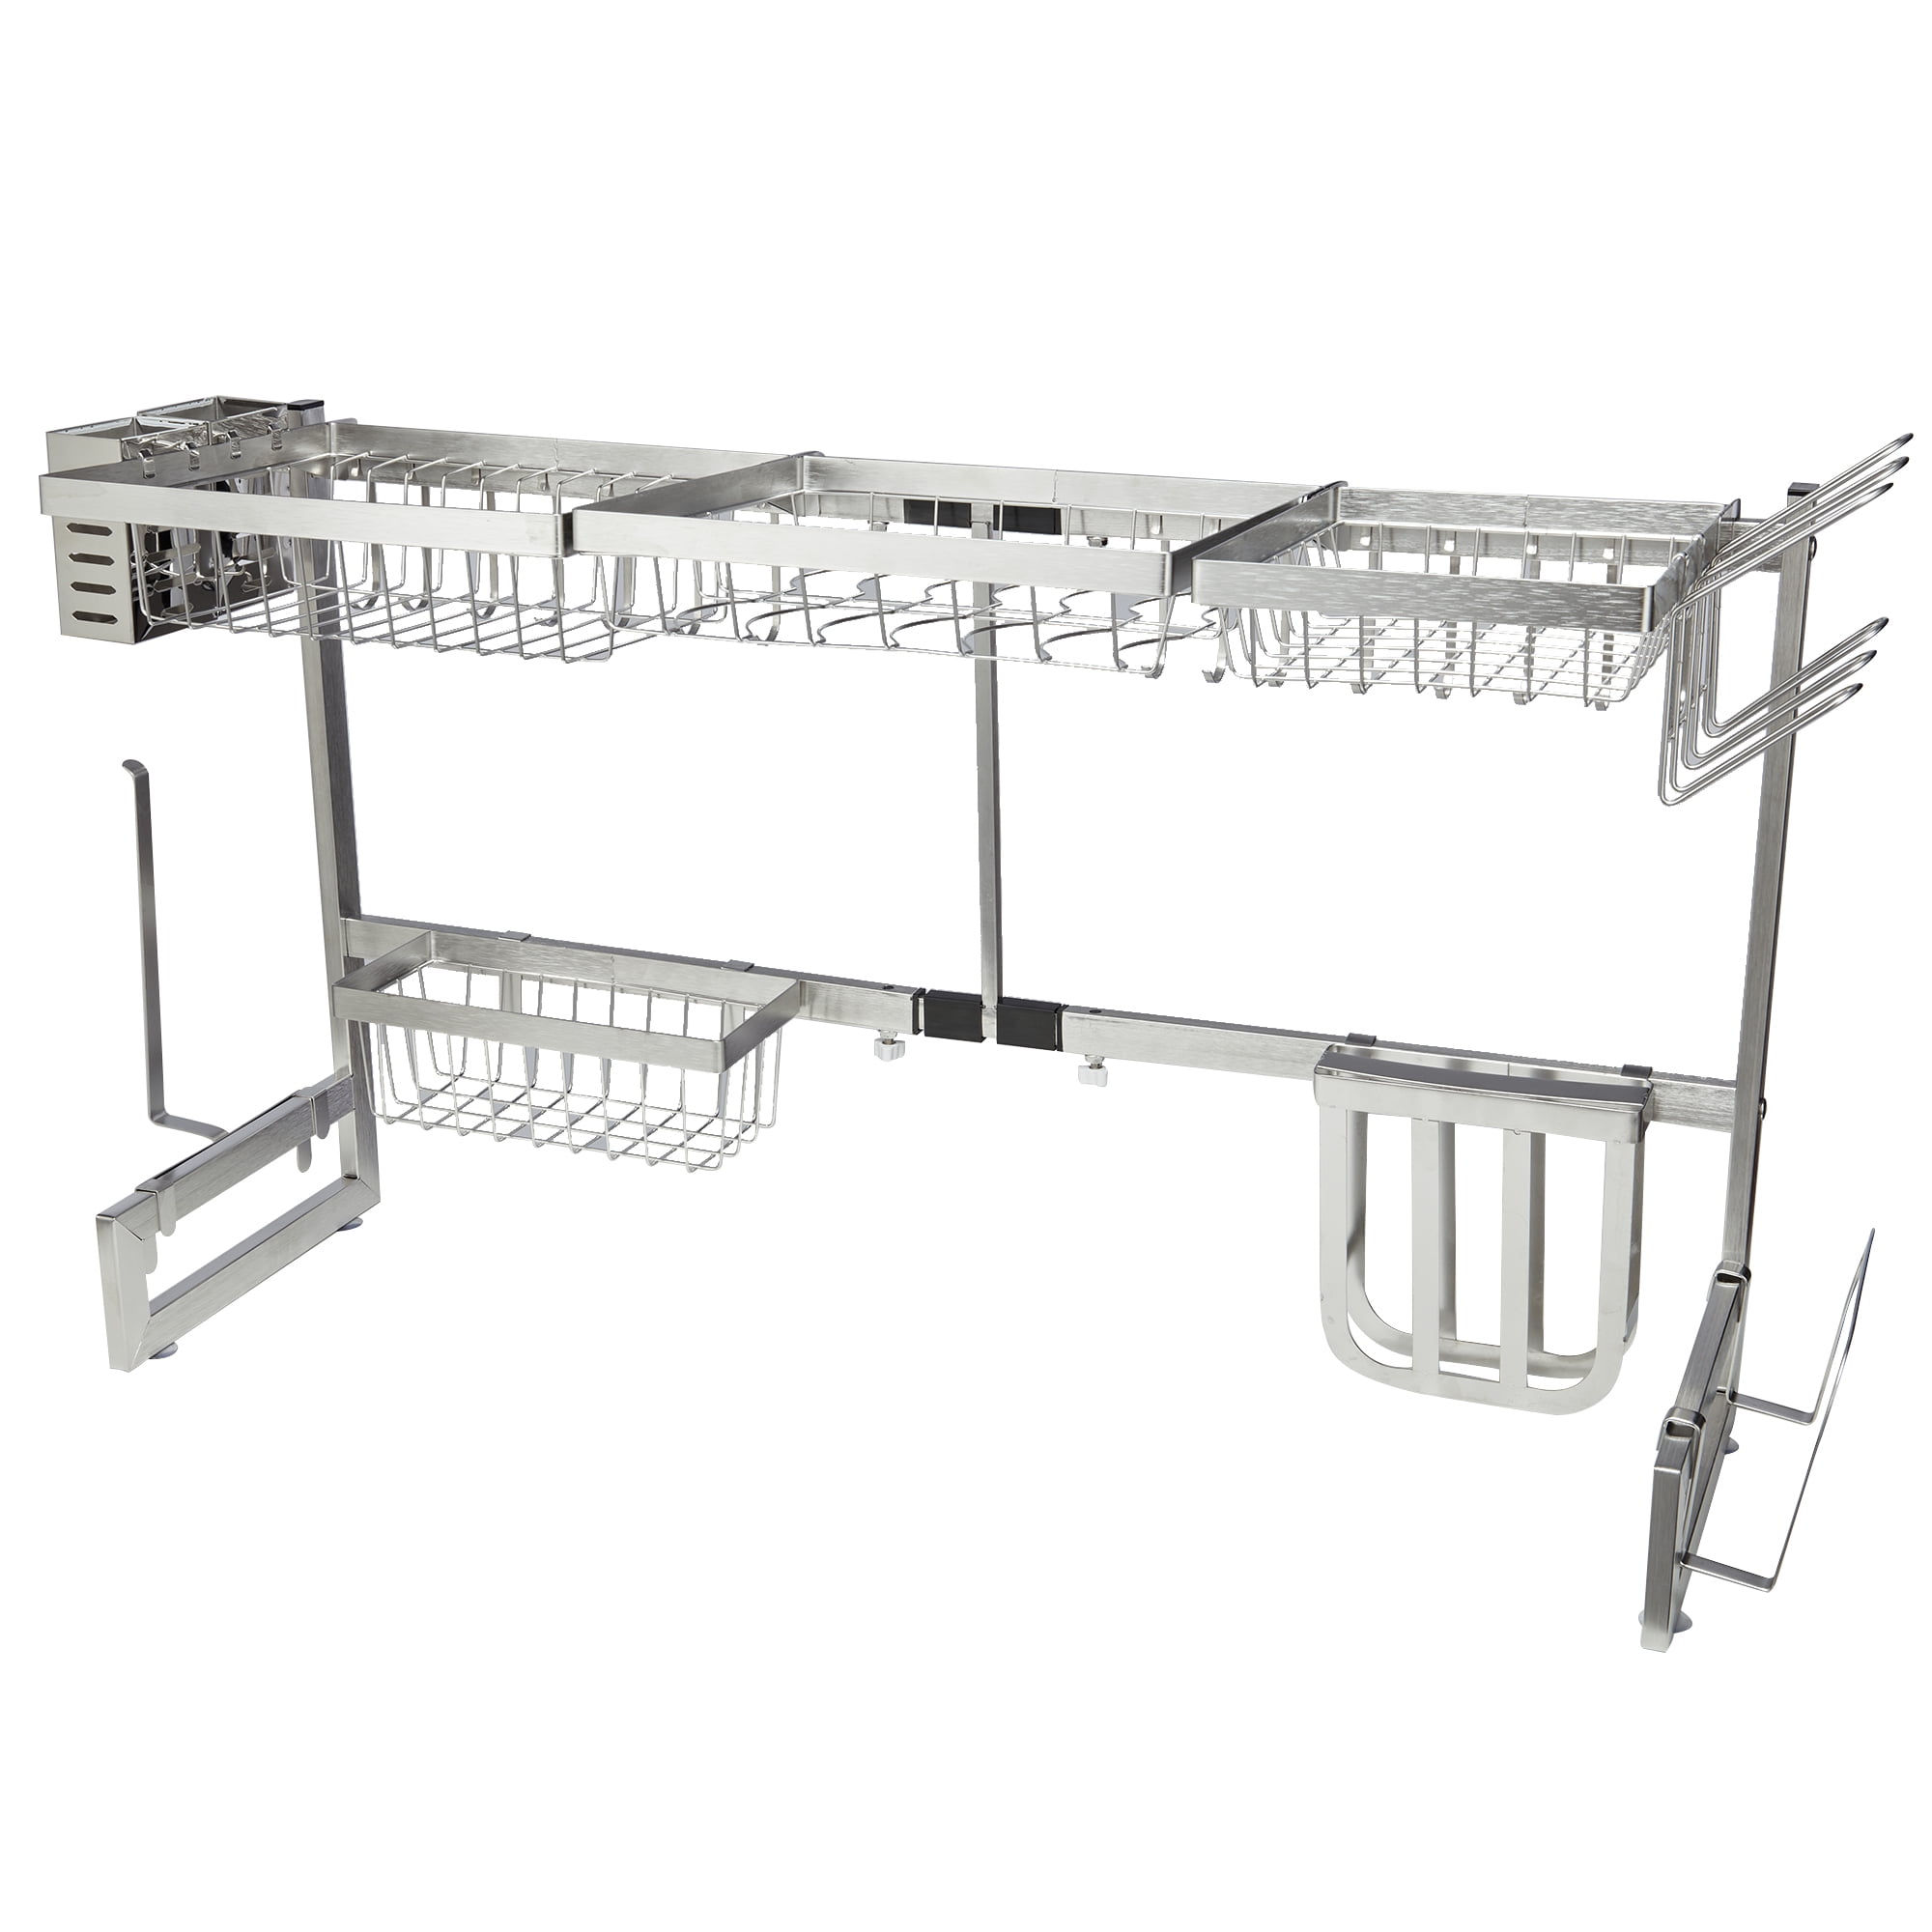 ULG Over The Sink Drying Rack, 2 Tier Length Adjustable (24.4-37) St